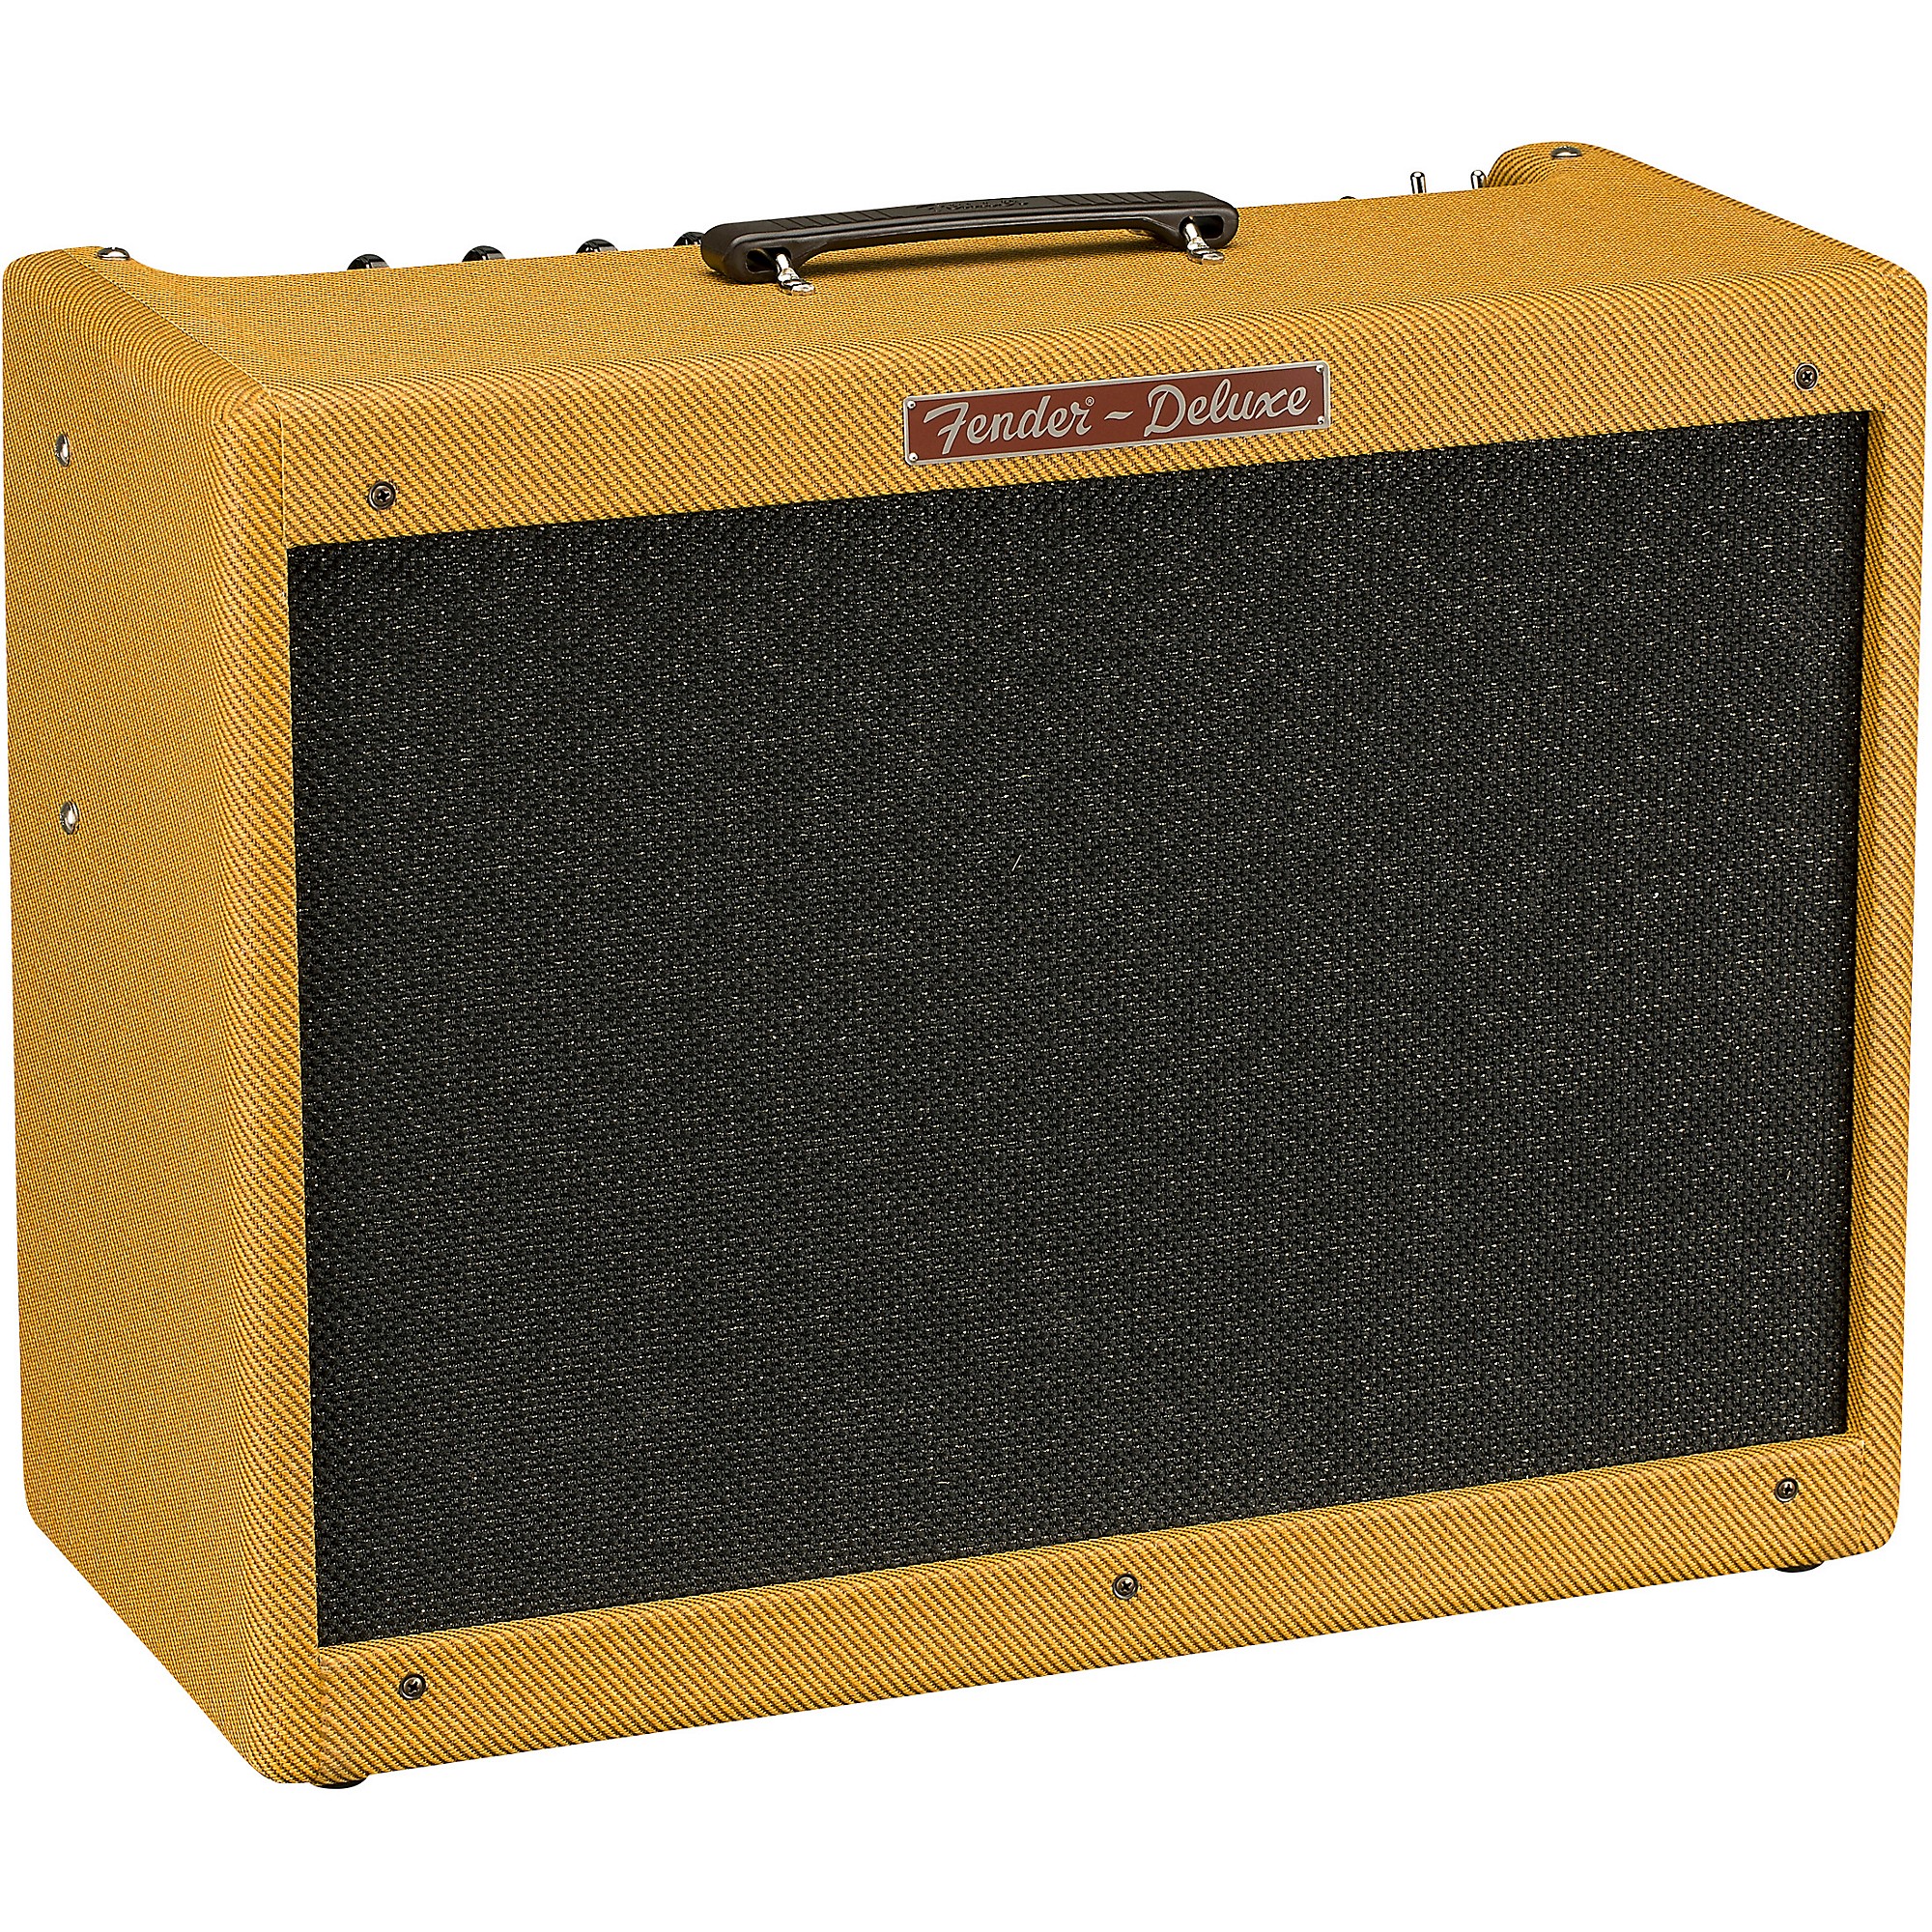 Fender Limited-Edition Hot Rod Deluxe IV 40W 1x12 Tube Combo Amp ...